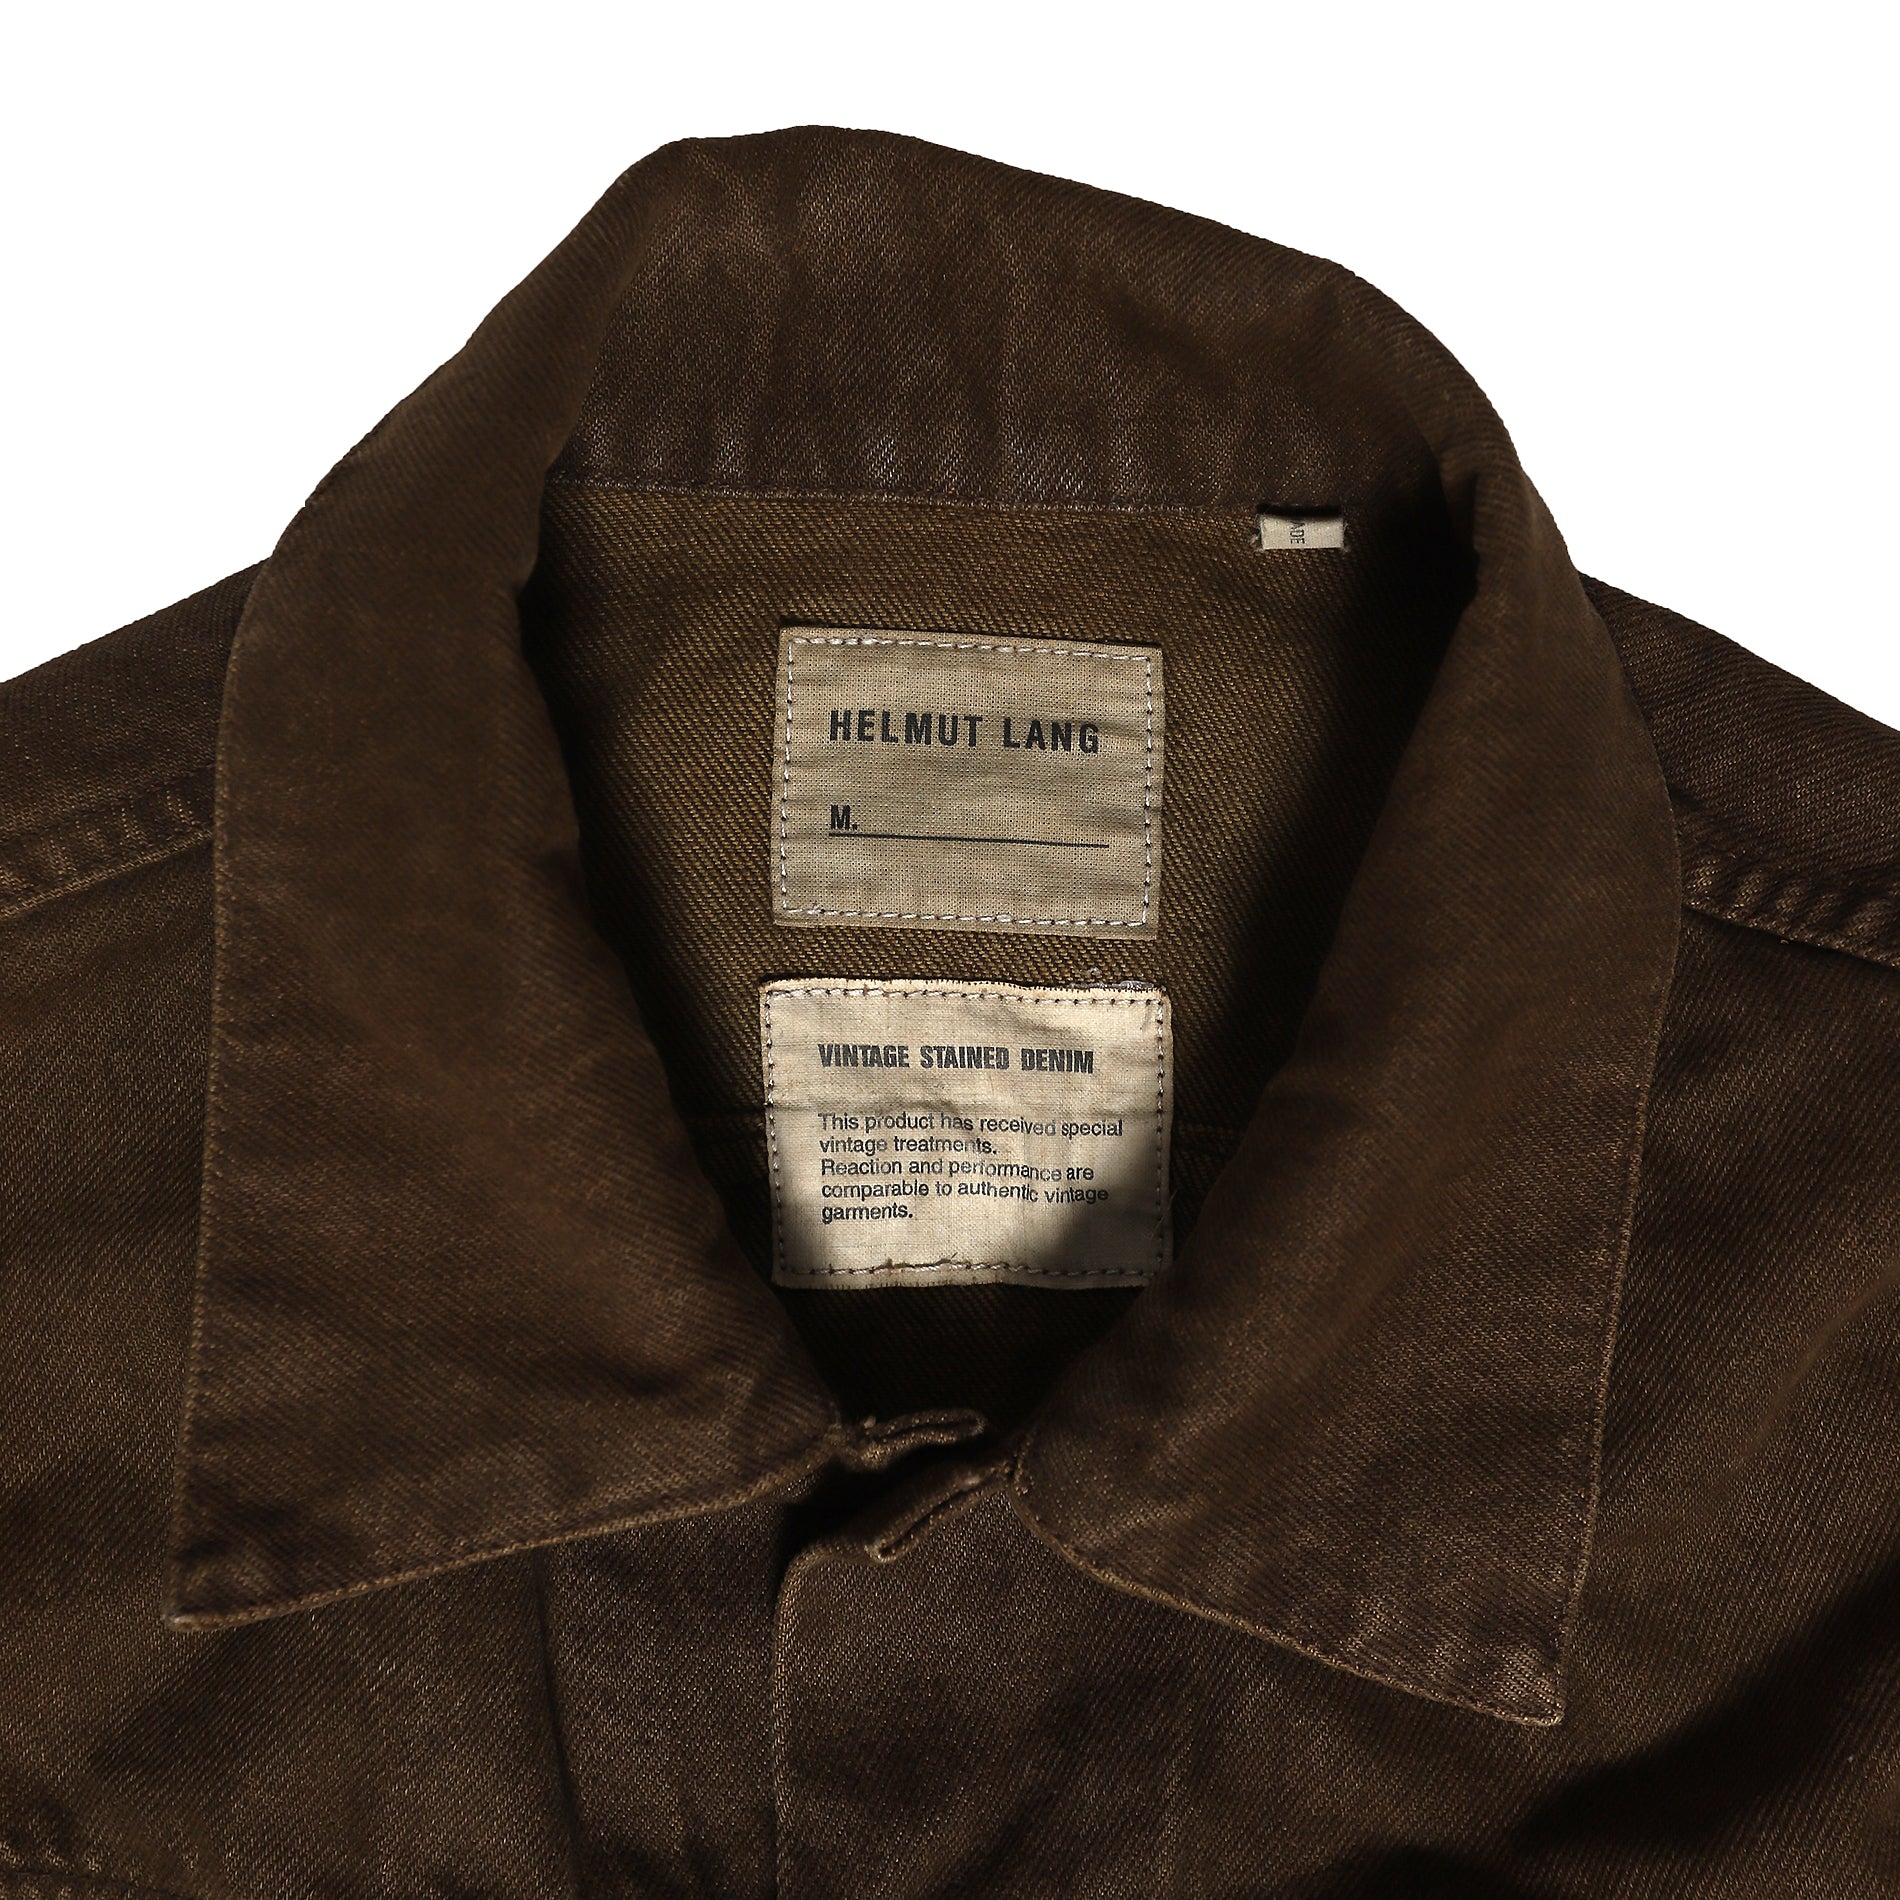 Helmut Lang Archival Vintage Stained Trucker Jacket